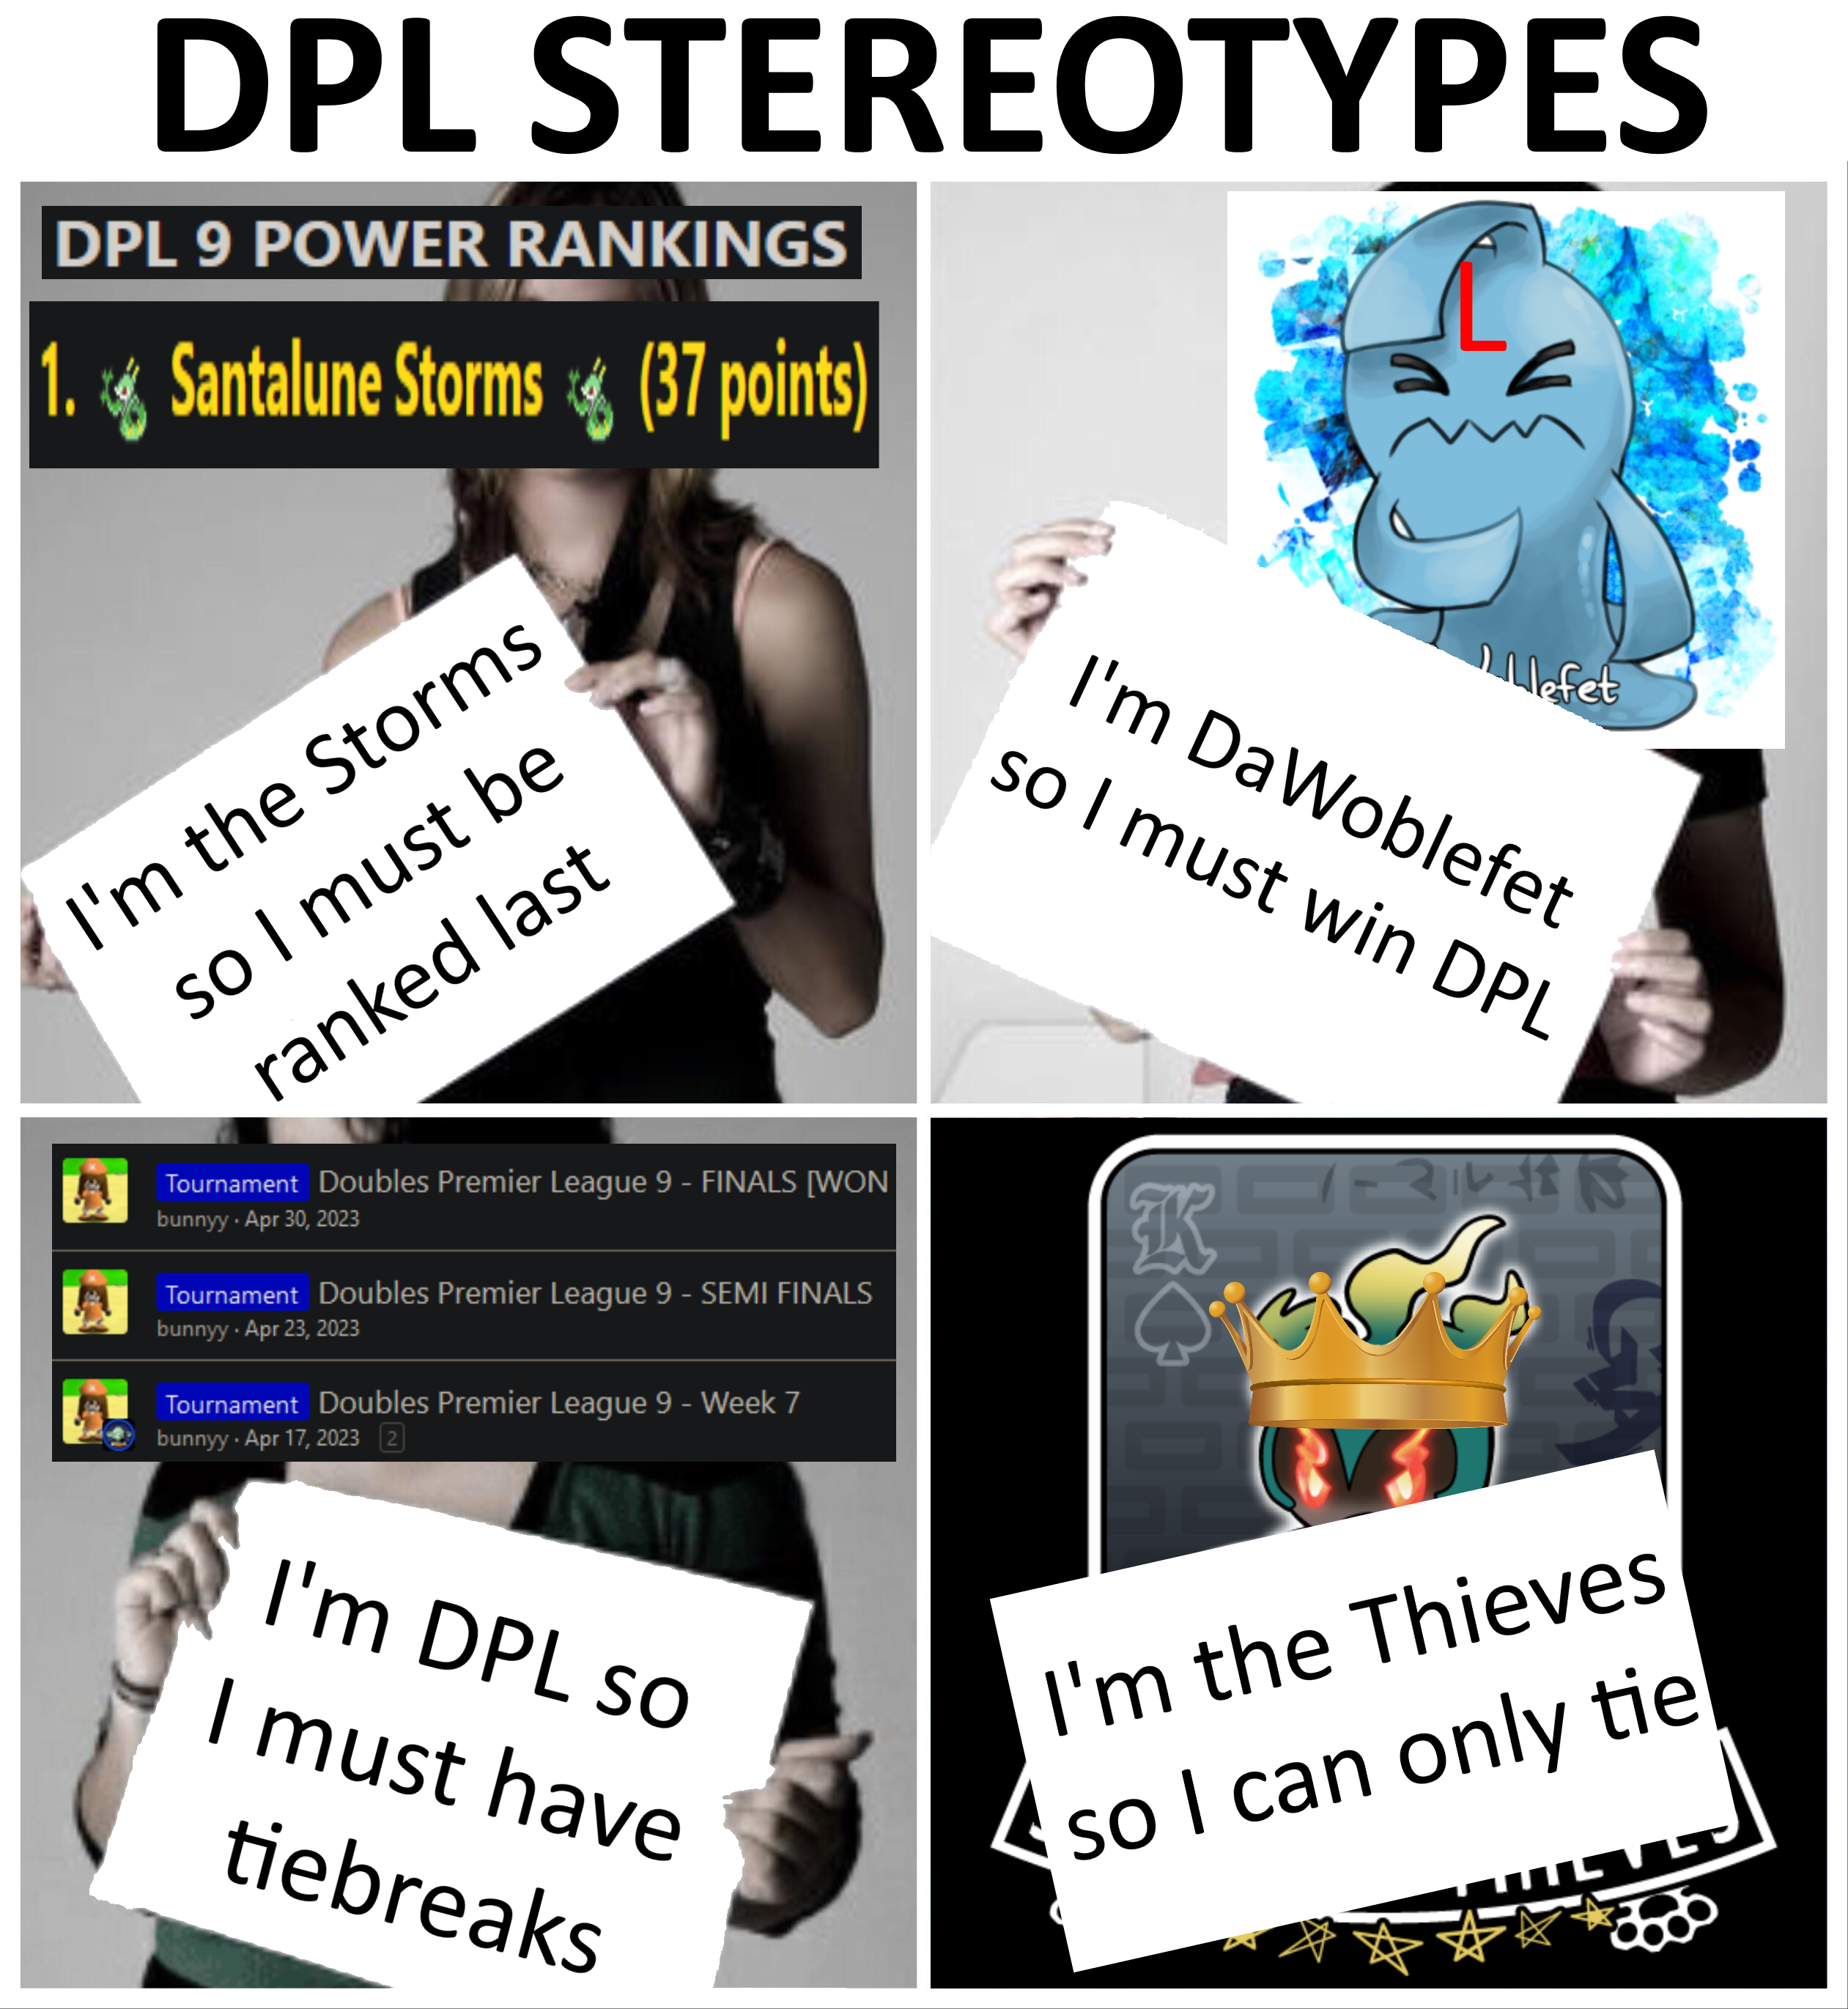 dpl_stereotypes2.png